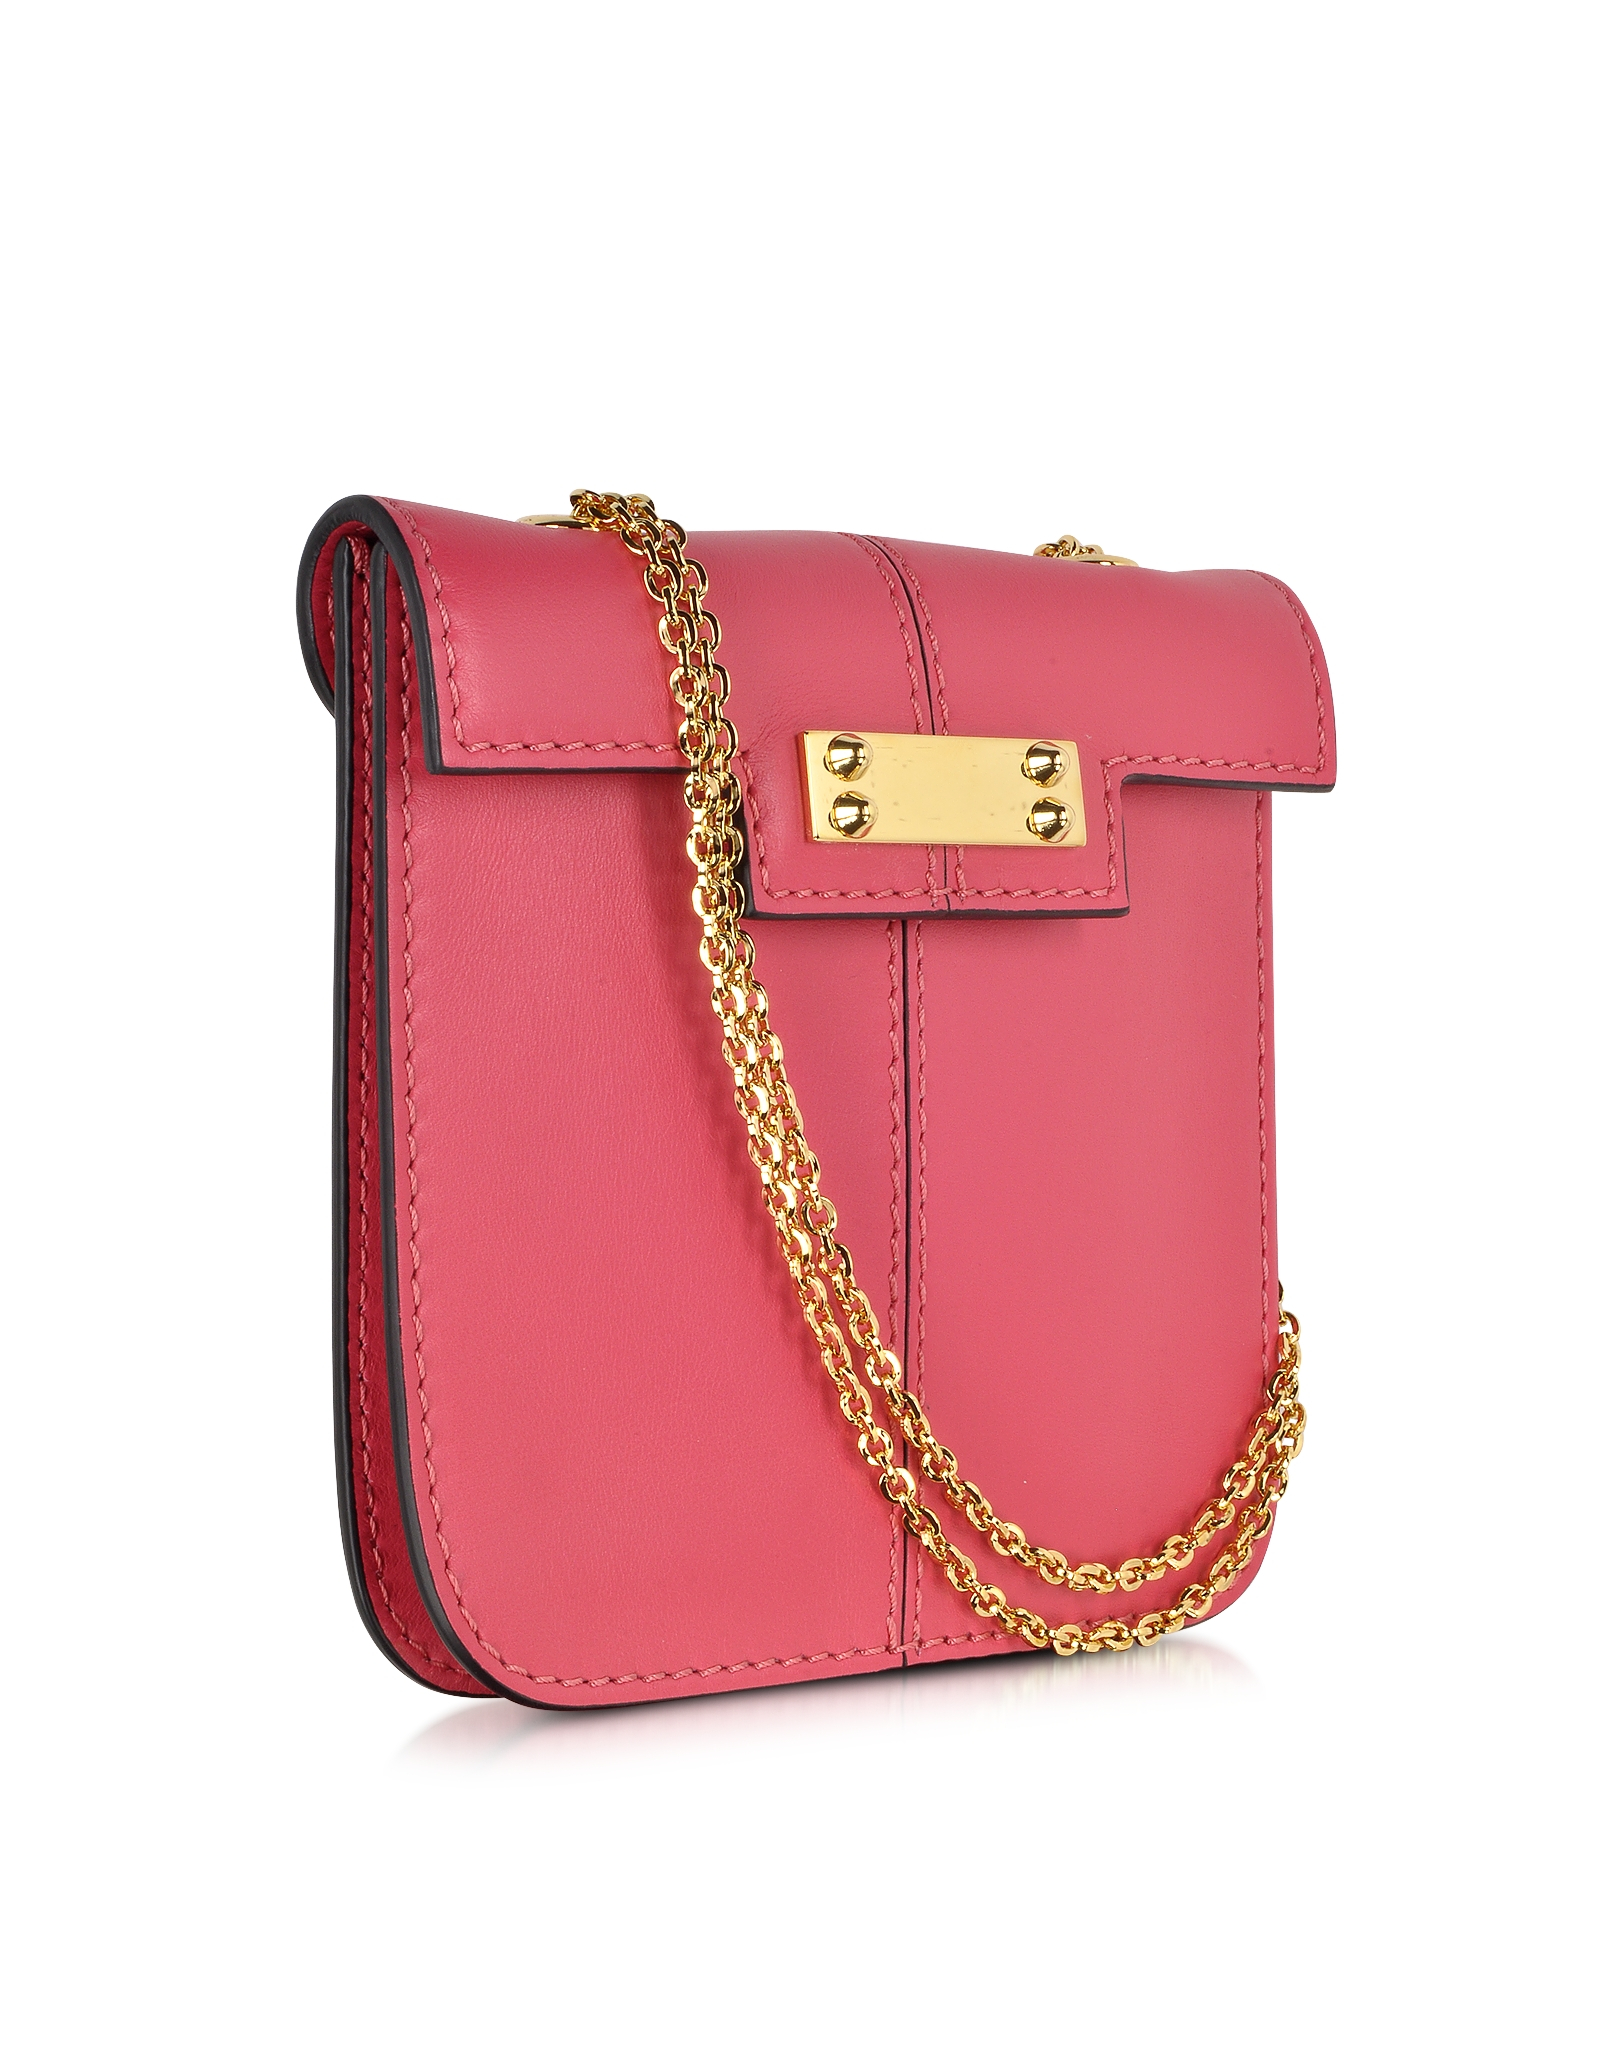 Valentino Mini Shoulder Bag With Chain Strap in Pink | Lyst